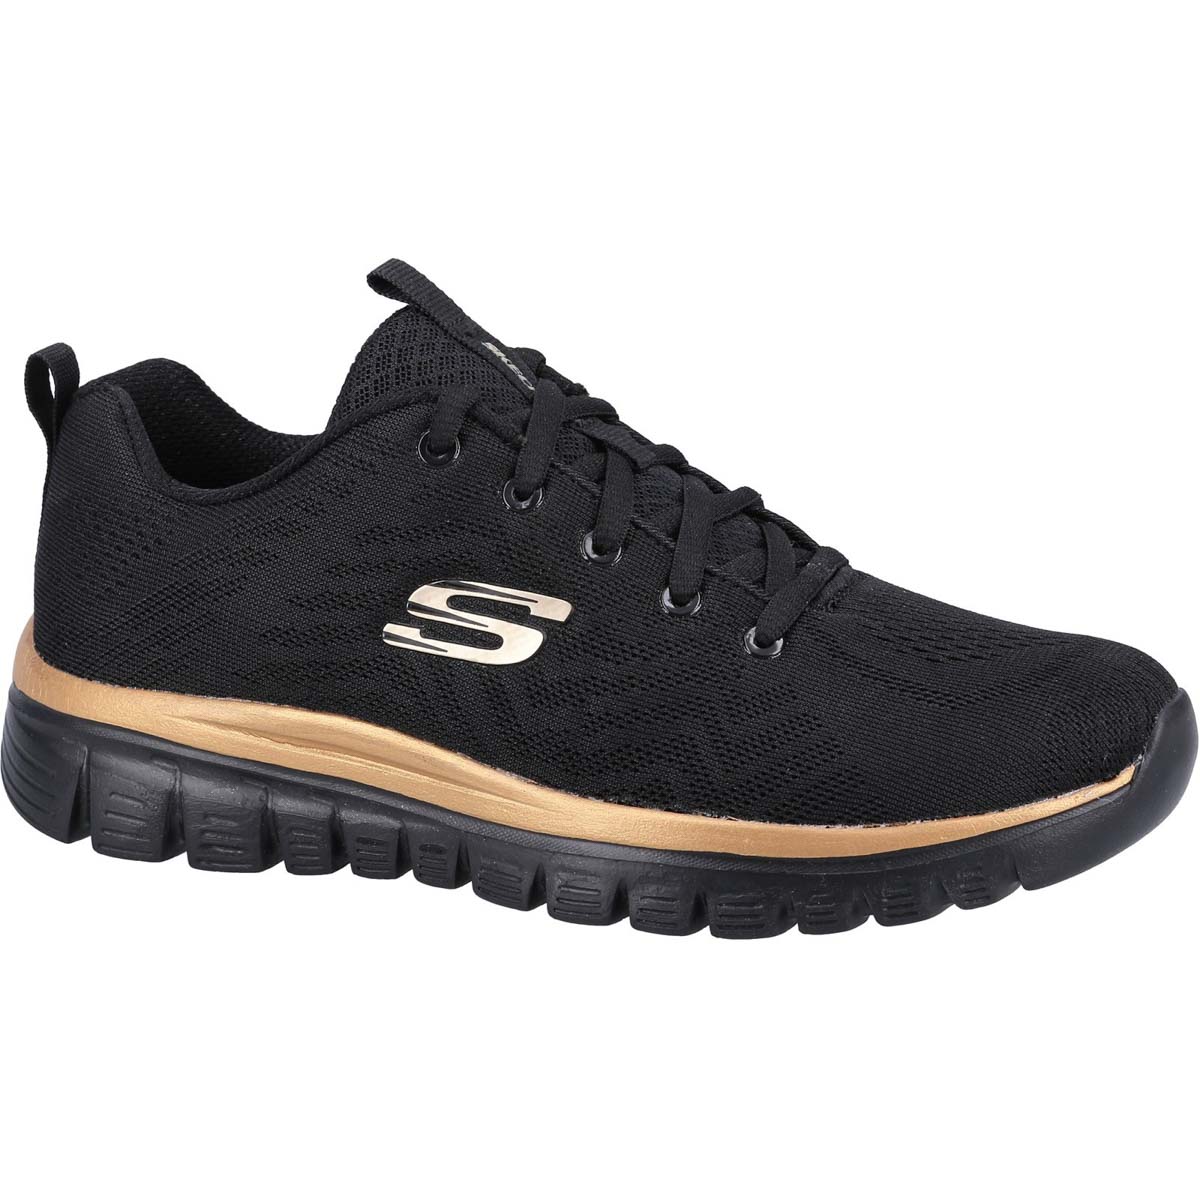 Skechers Graceful Get Connected Black Rose Gold Womens Trainers 12615 In Size 8 In Plain Black Rose Gold